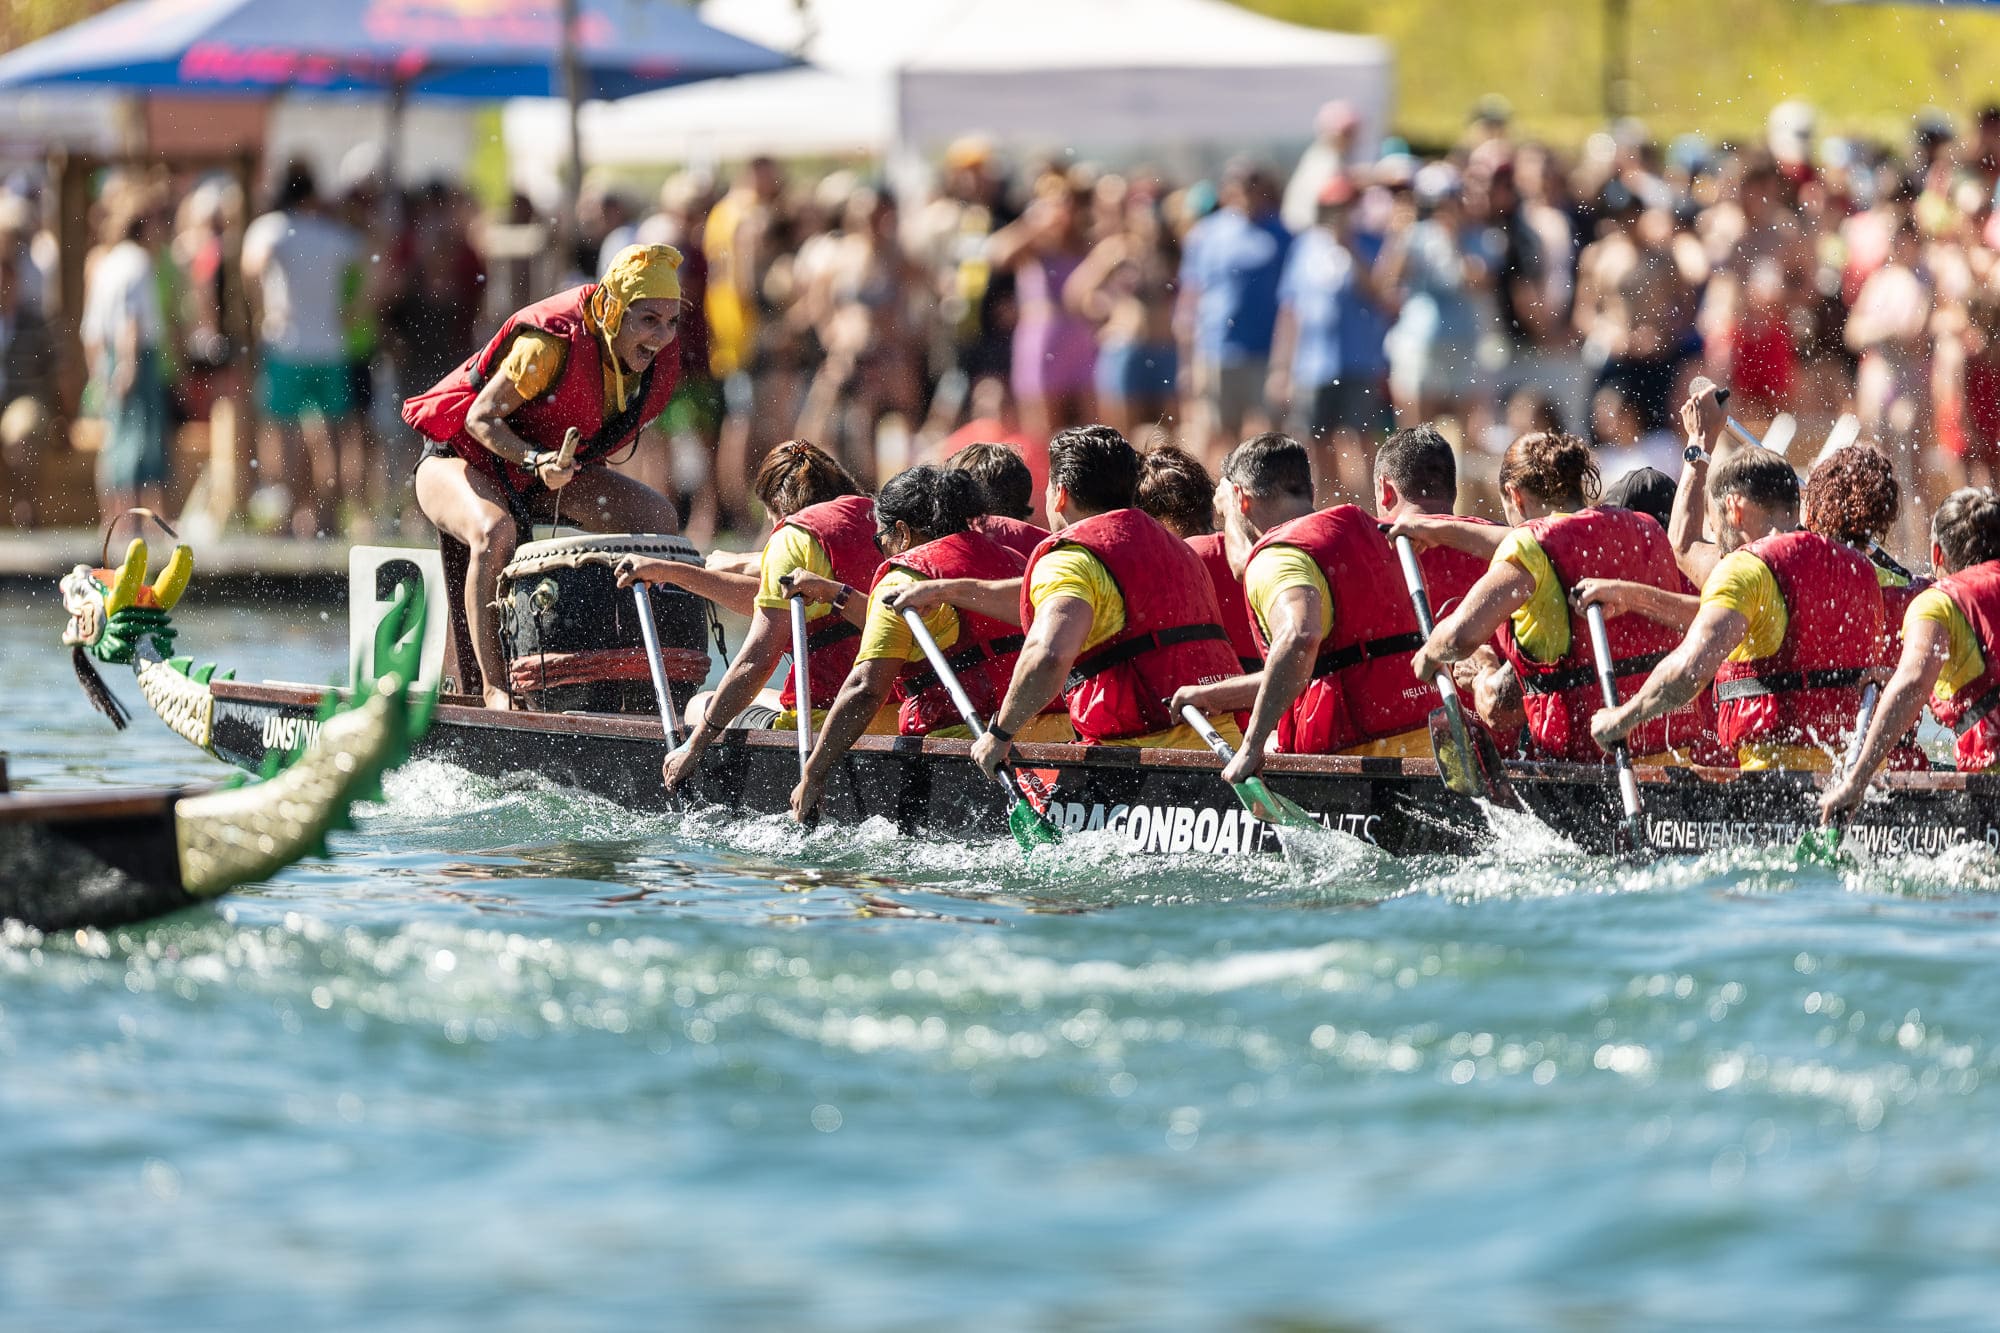 Dragon boat races in Eglisau – A highlight for Hong Kong’s 25th Anniversary